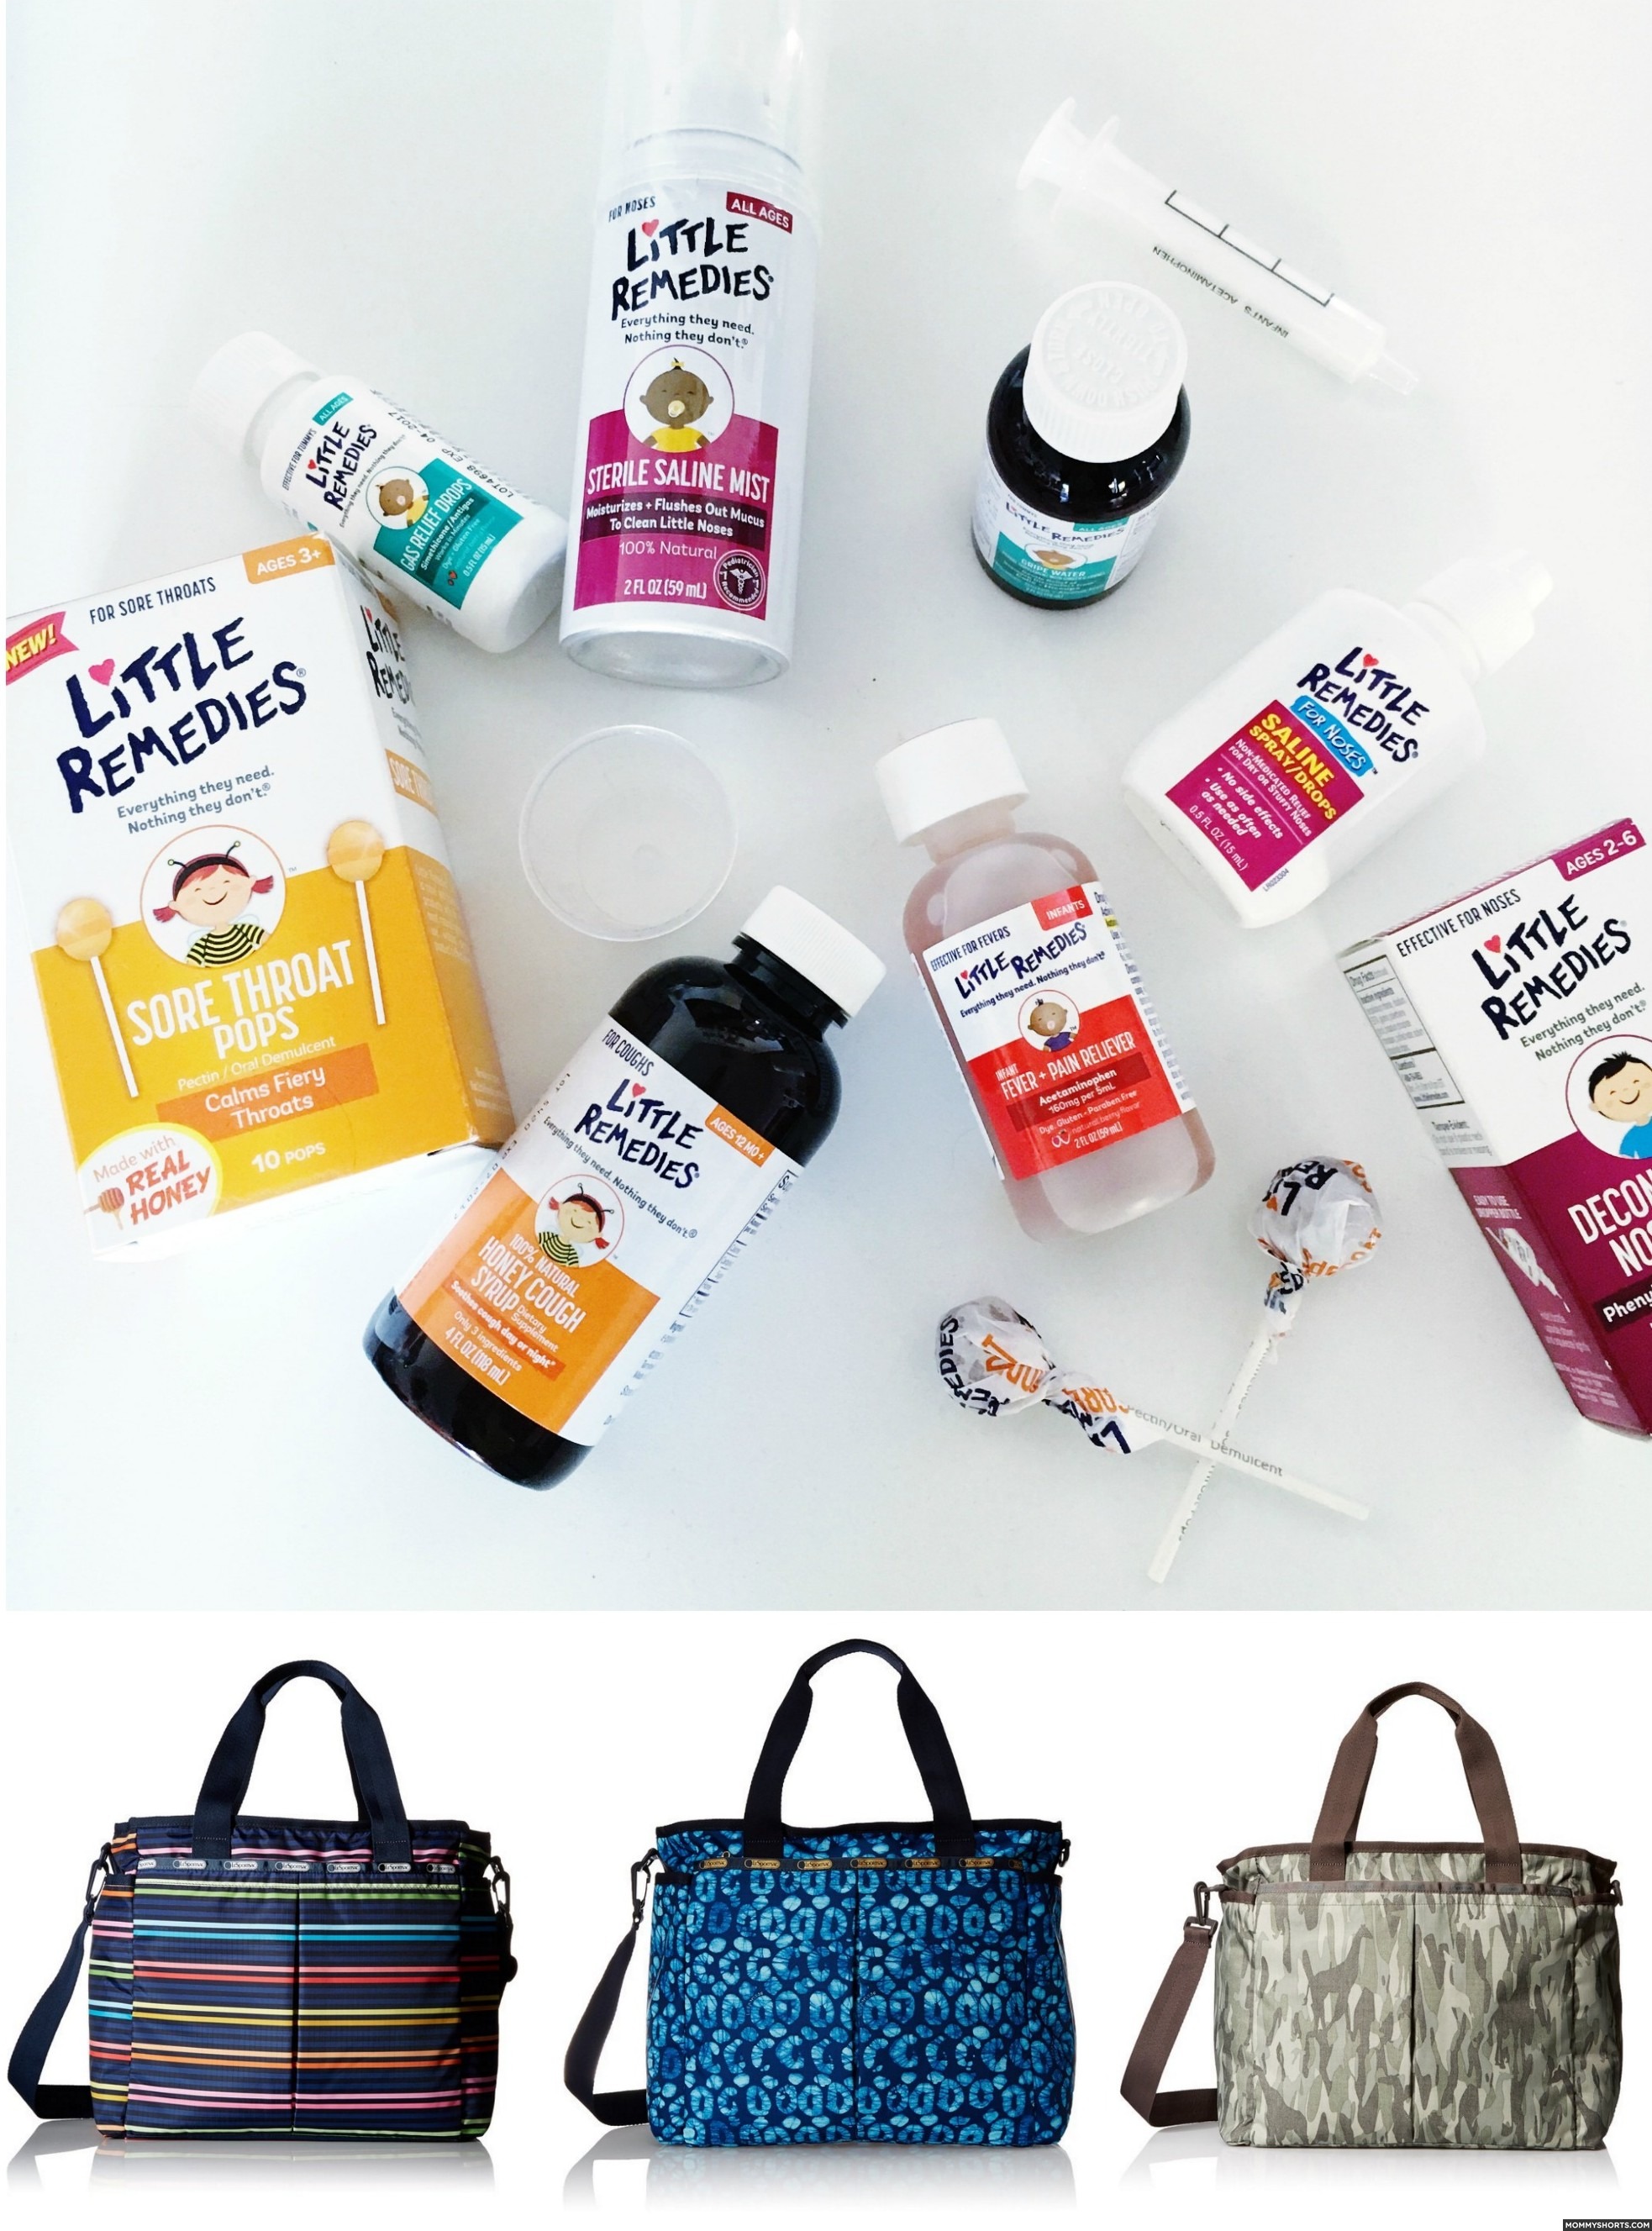 Little Remedies Giveaway